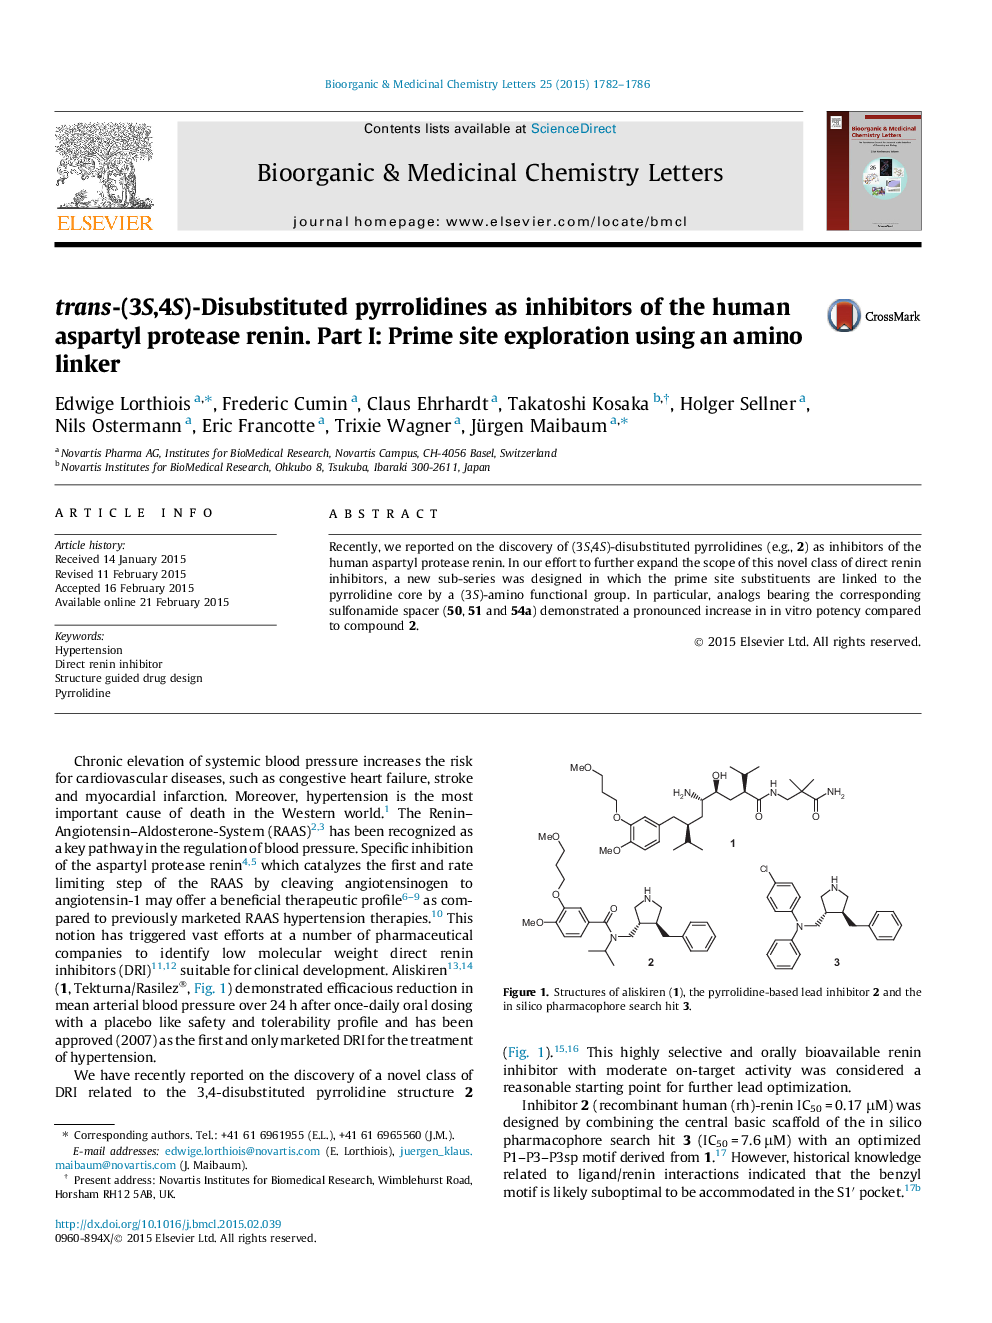 trans-(3S,4S)-Disubstituted pyrrolidines as inhibitors of the human aspartyl protease renin. Part I: Prime site exploration using an amino linker